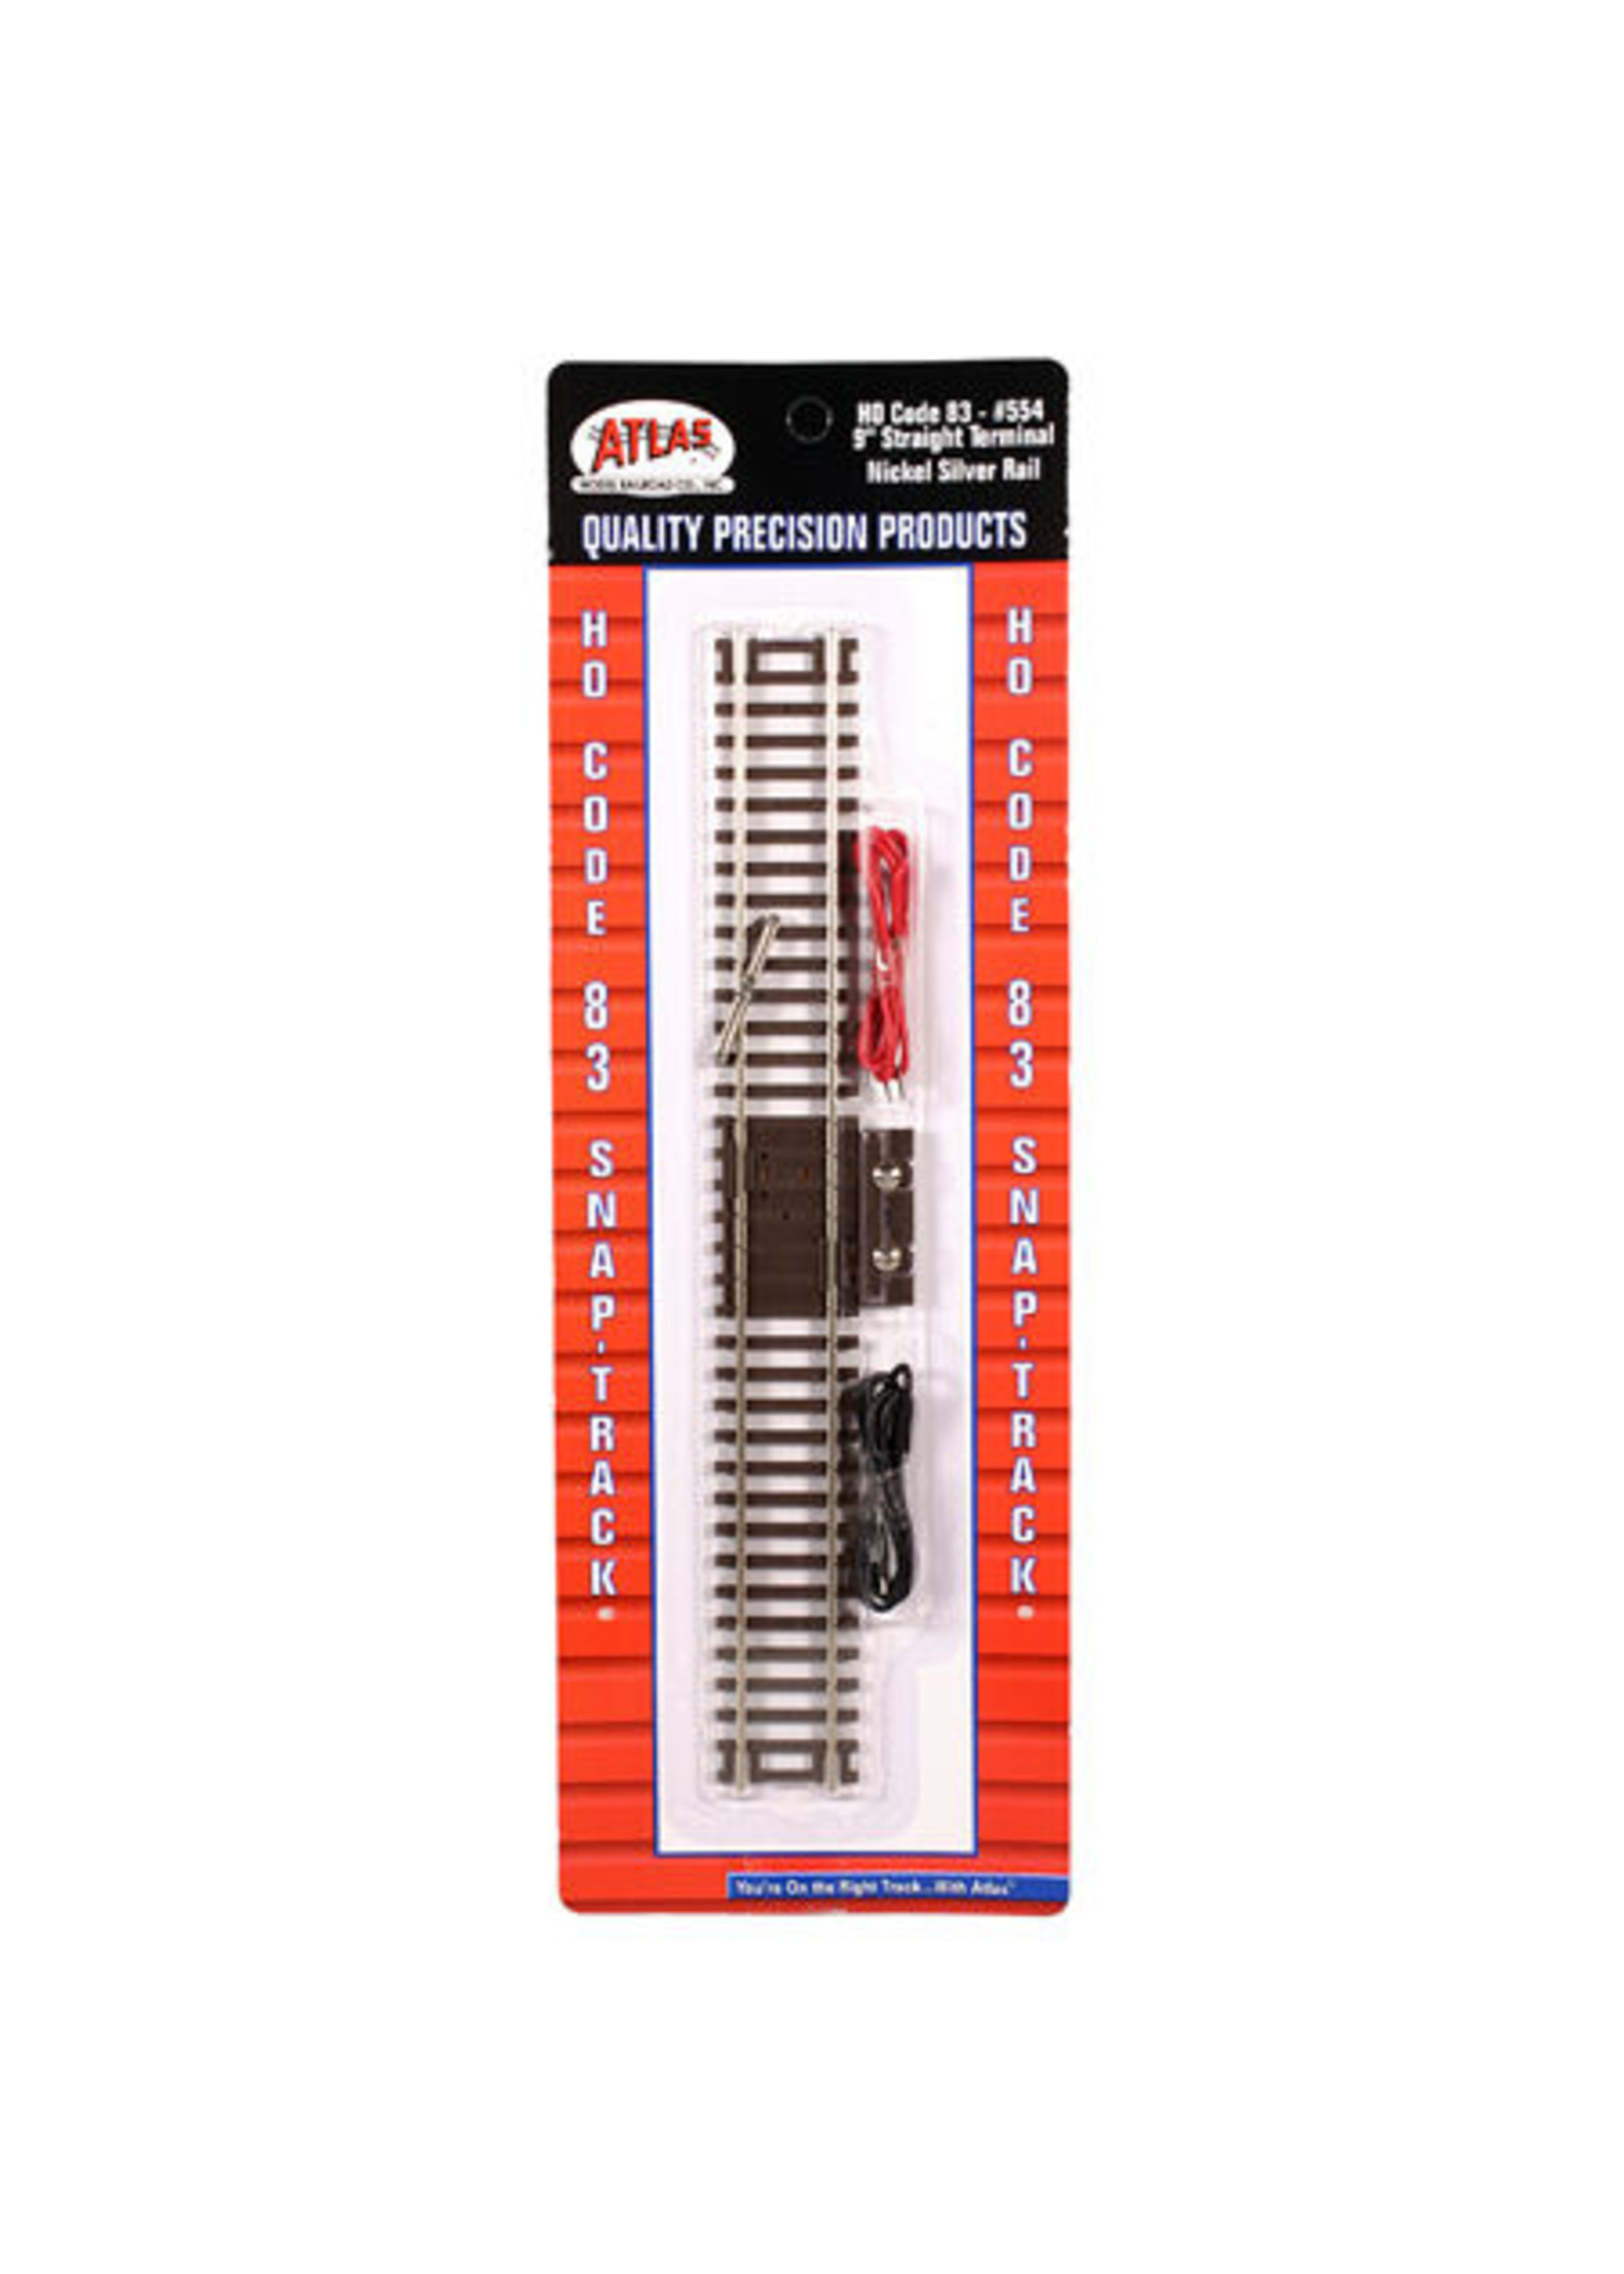 Atlas ATL554 - Code 83 Terminal Track with Wire